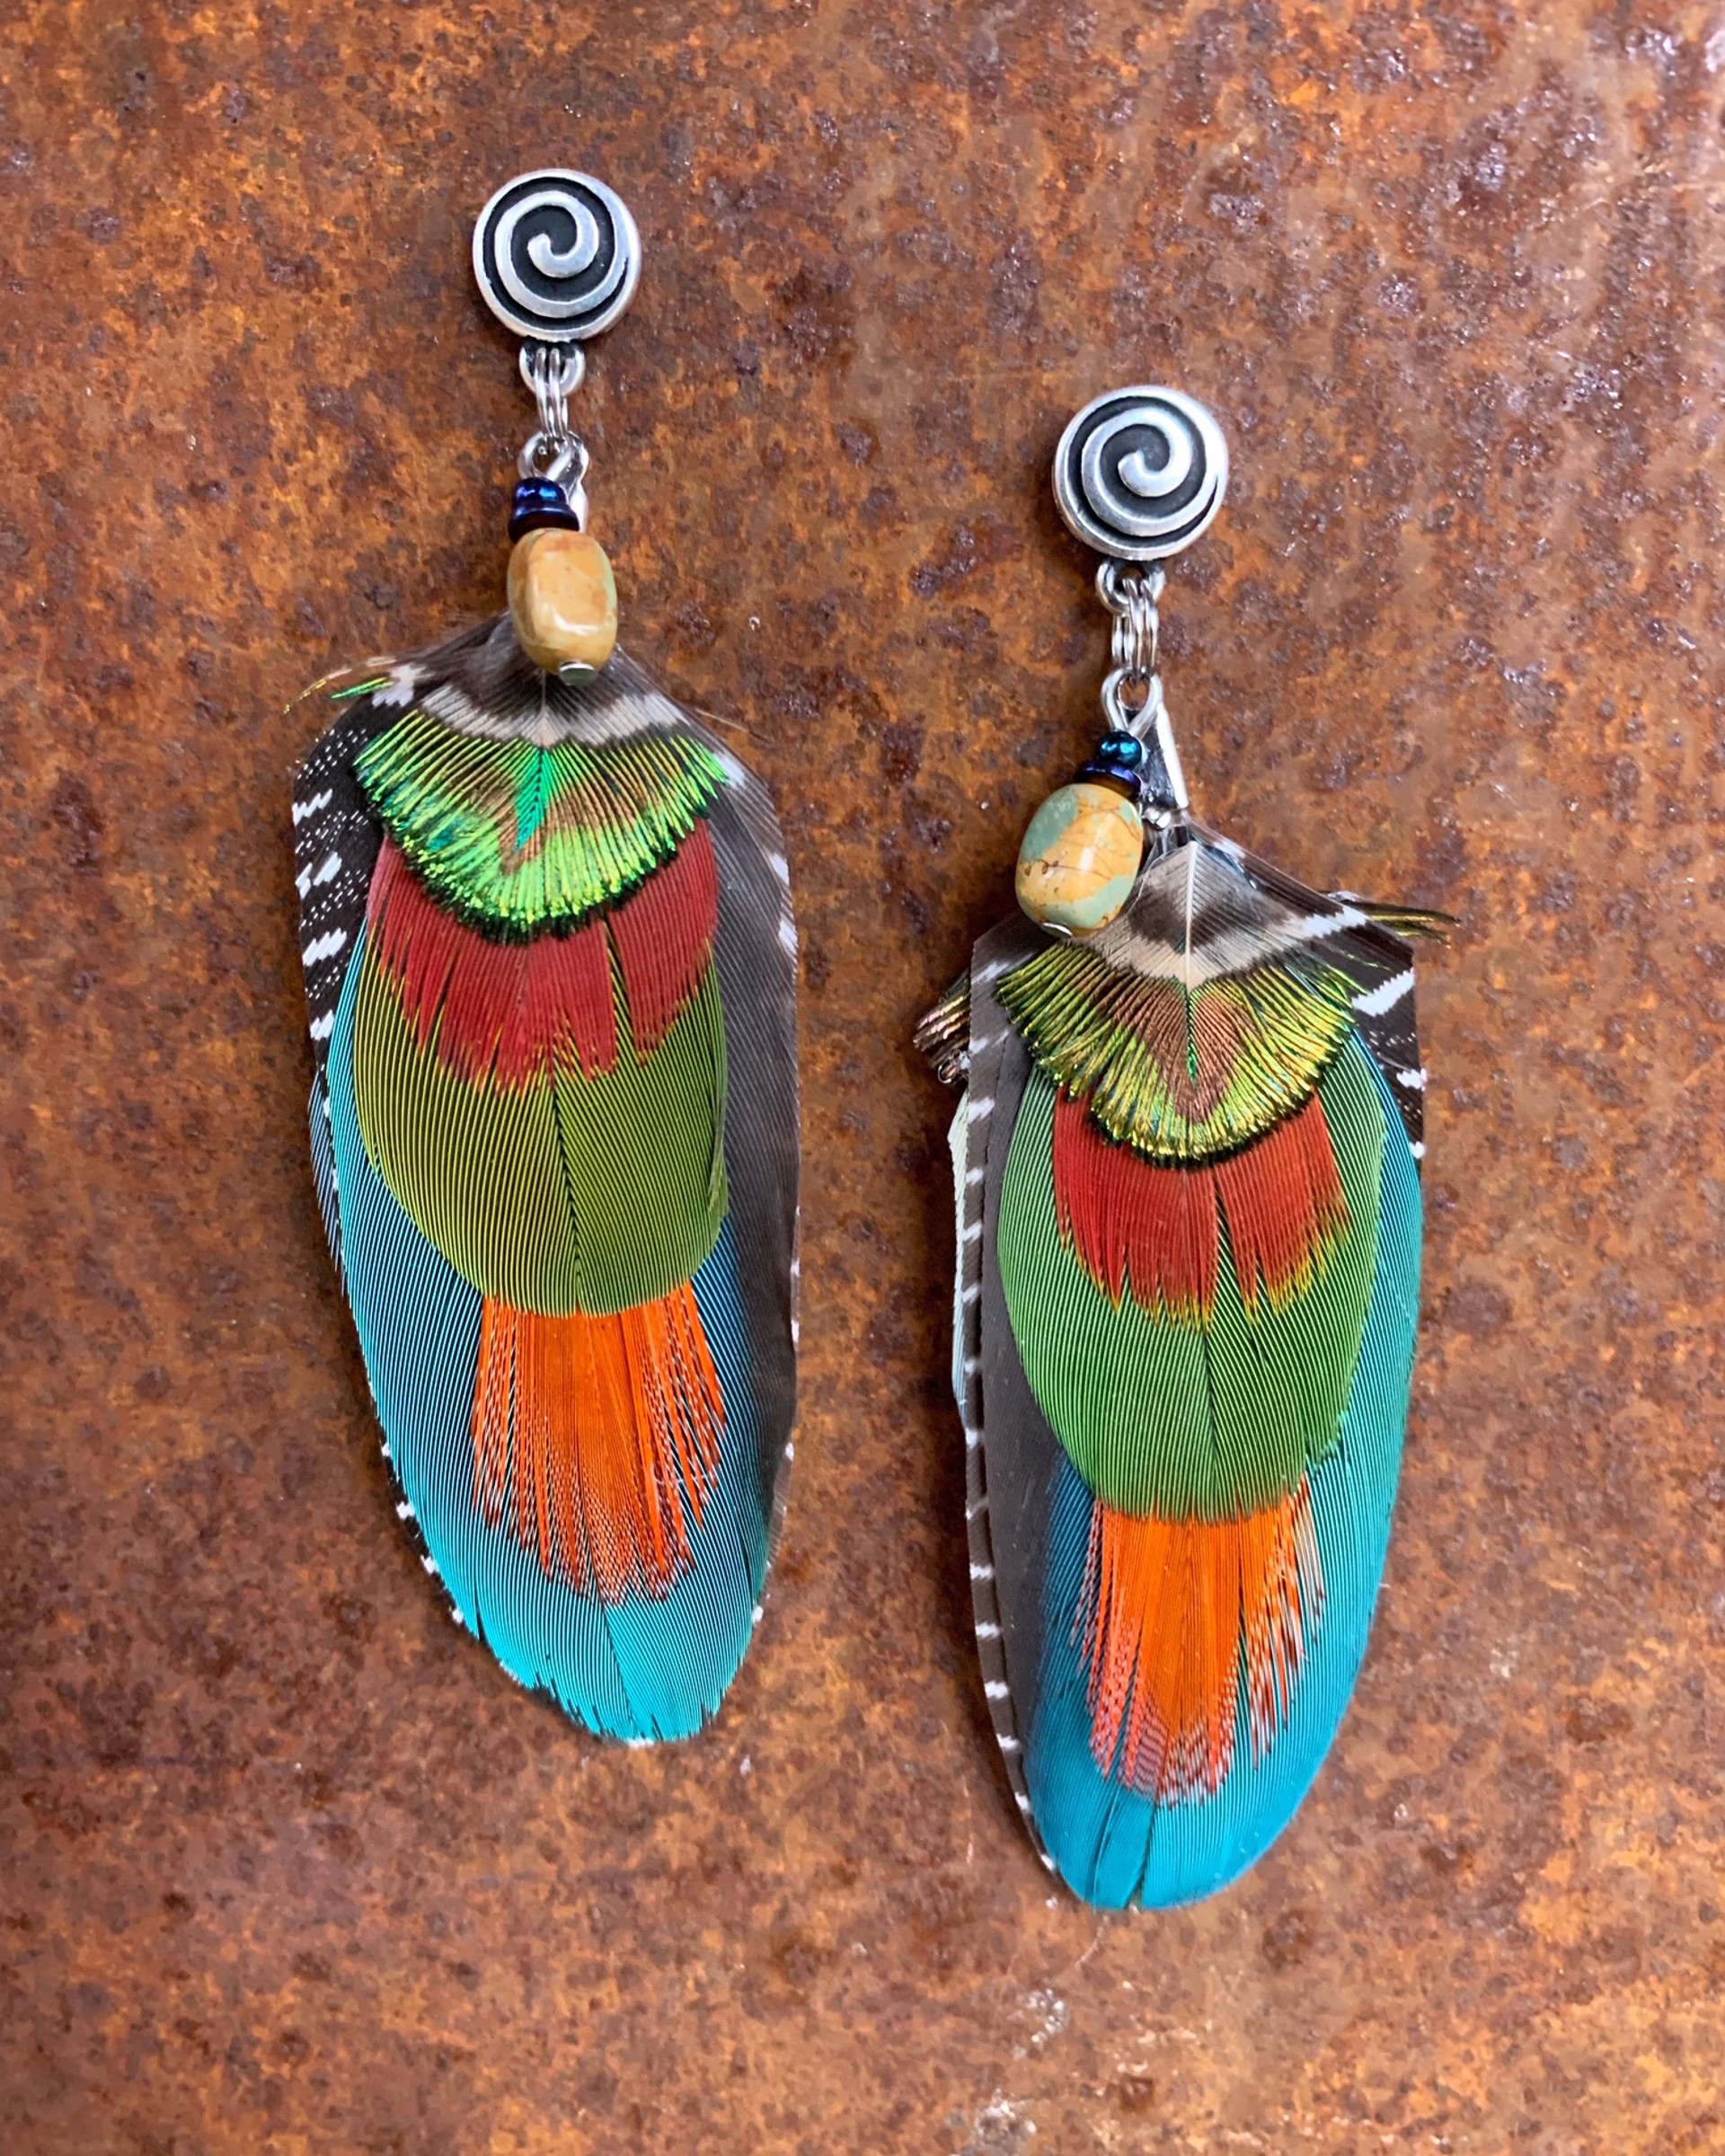 K810 Ethically Sourced Parrot Earrings by Kelly Ormsby